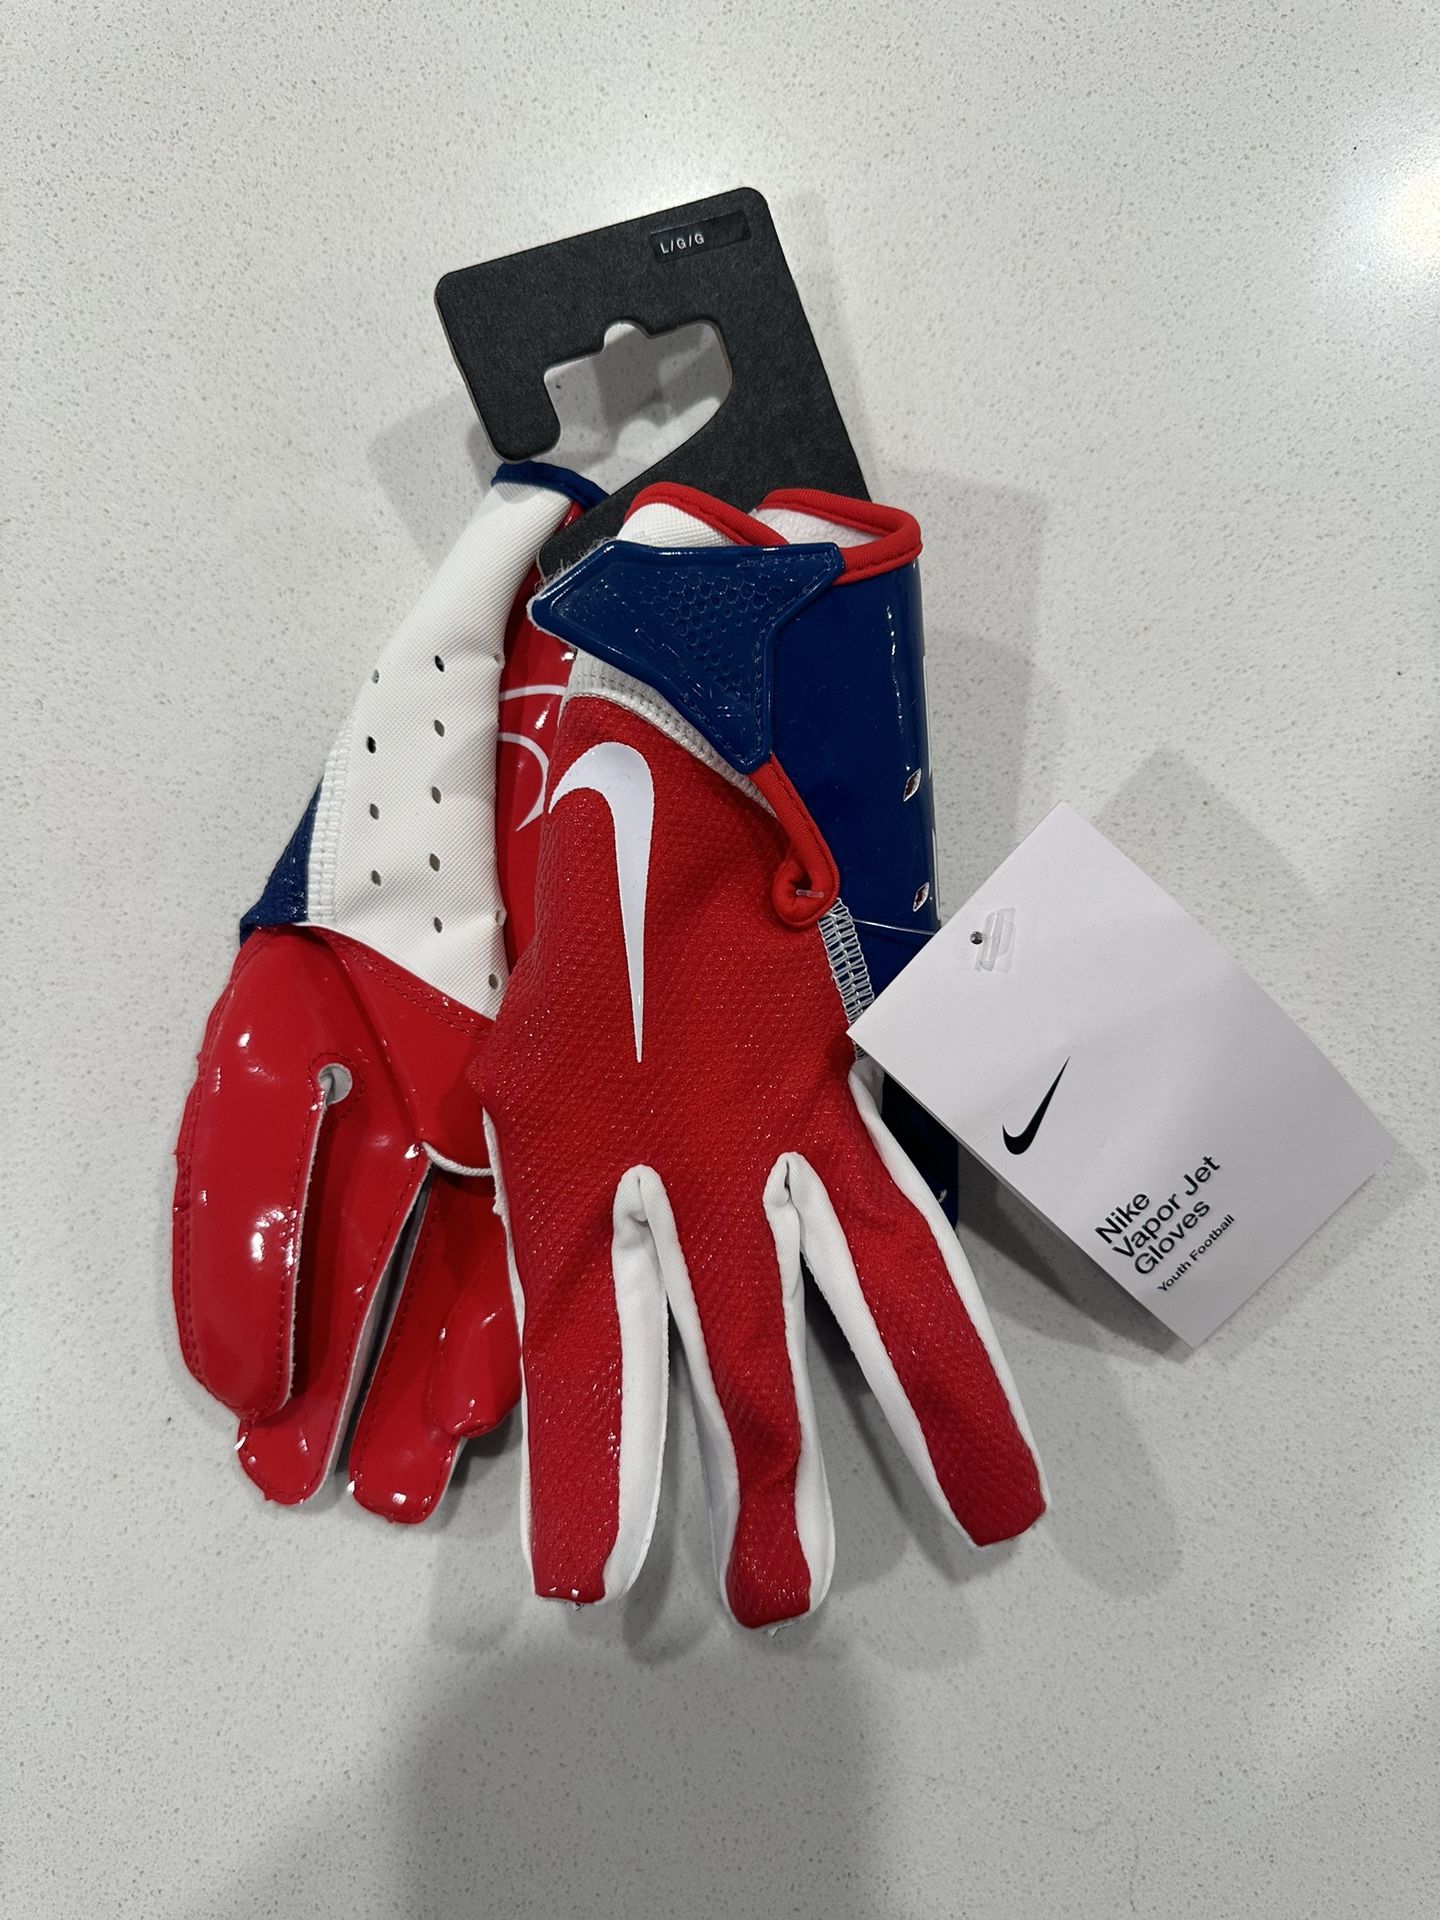 Brand, New Size Large Youth Football Gloves